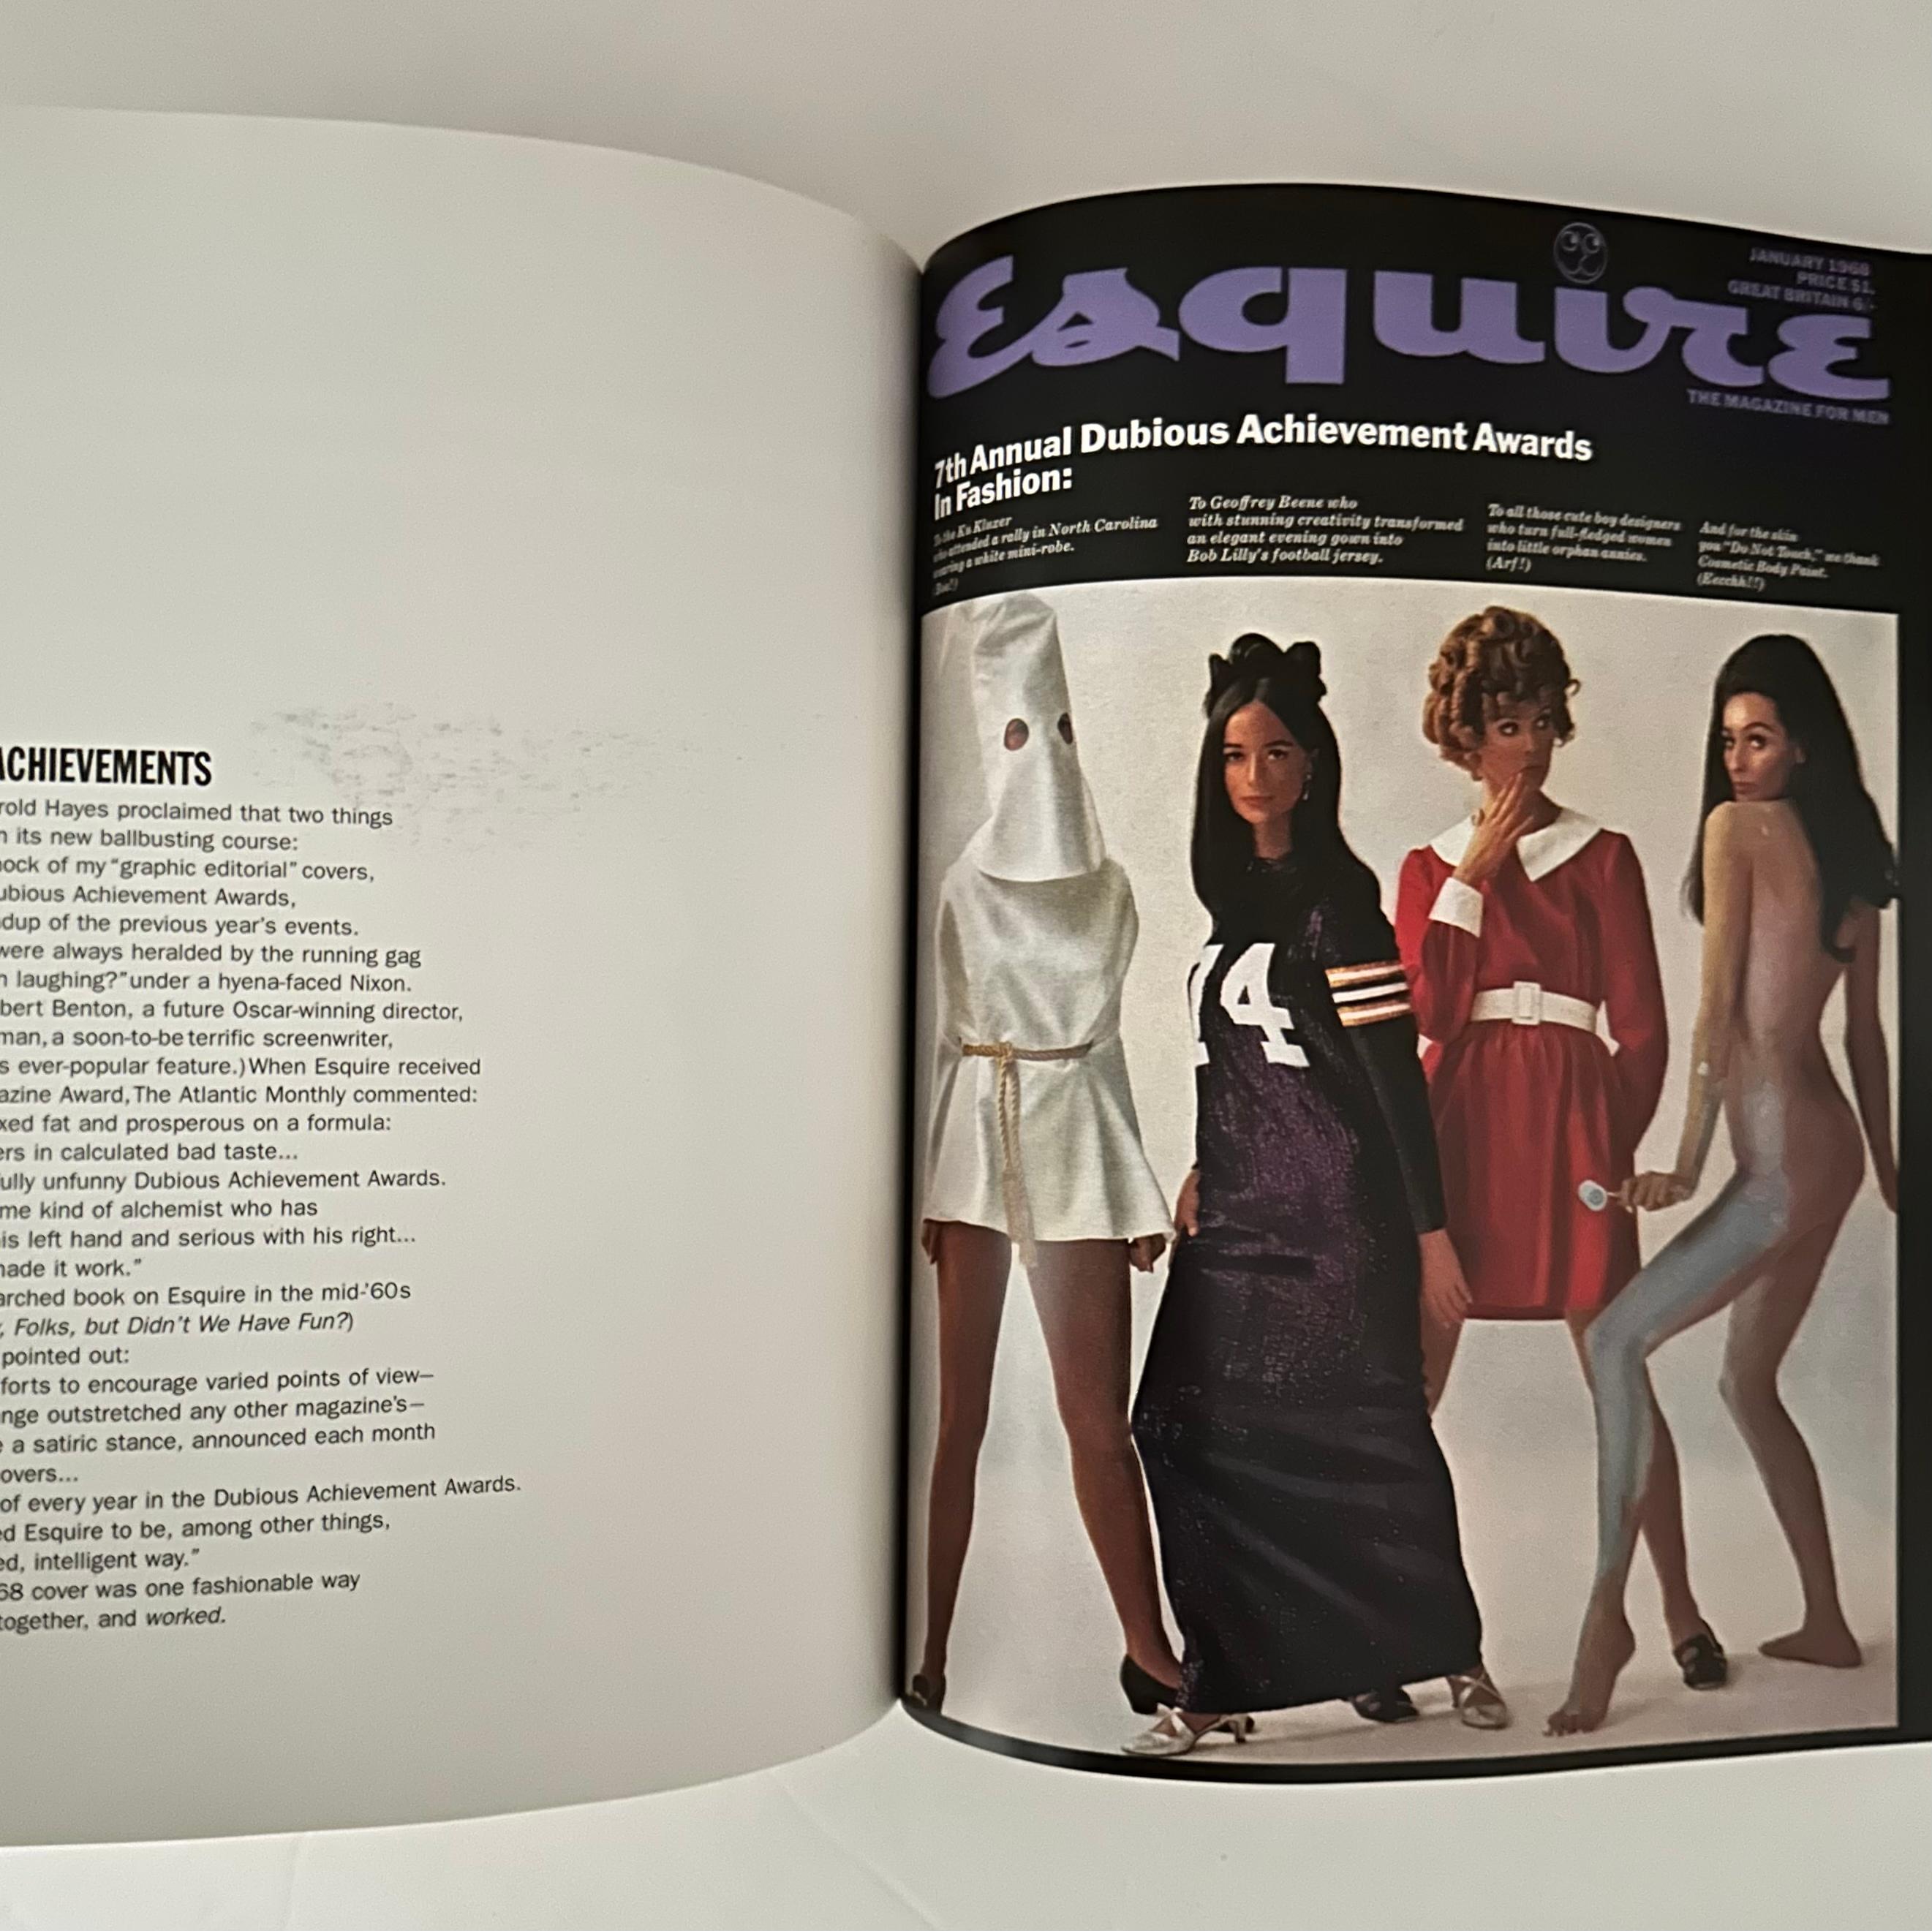 Published by The Monacelli Press, 1st edition, New York, 1996. Softcover, English text.

This amazing book charts the amazing career of George Lois in image-making and spearheading the modern images of the ‘60s. An inescapable advertising genius,